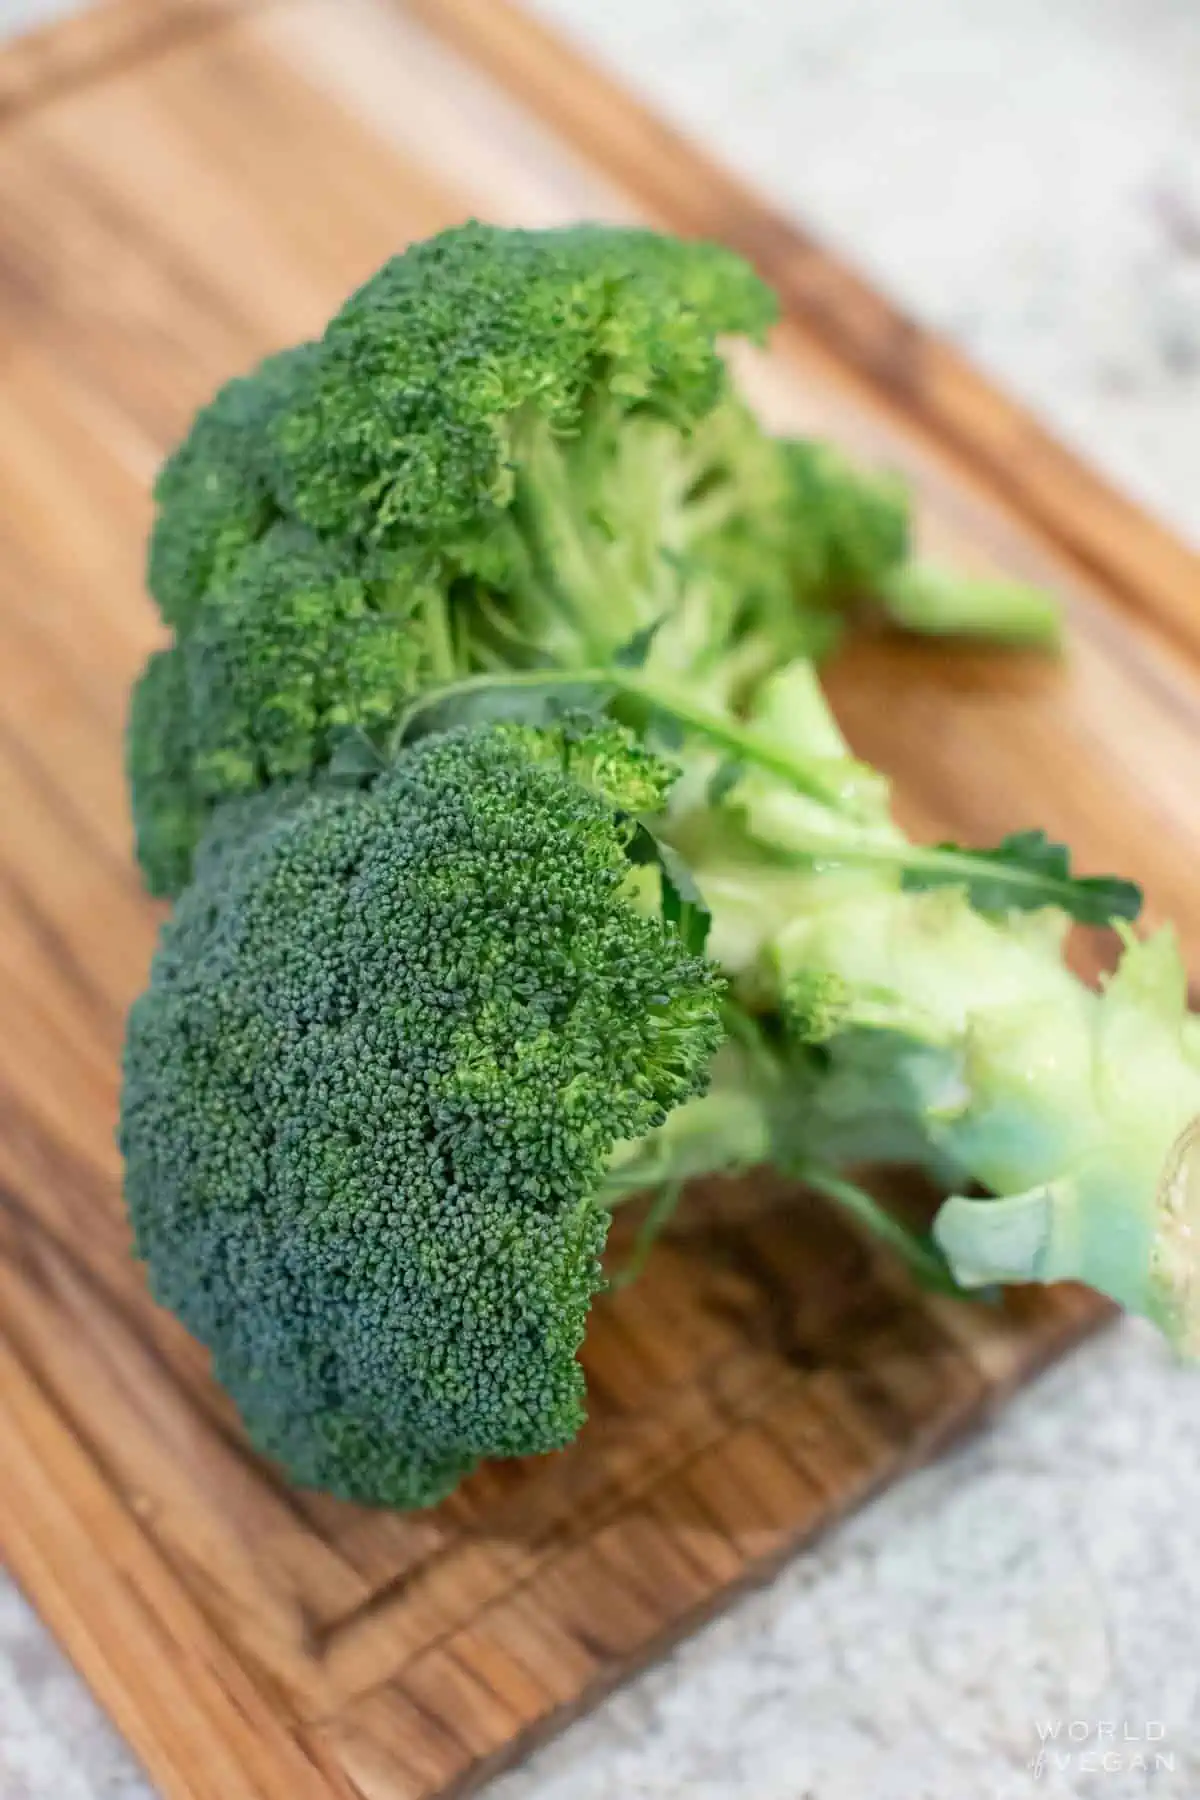 Two heads of broccoli on a cutting board.